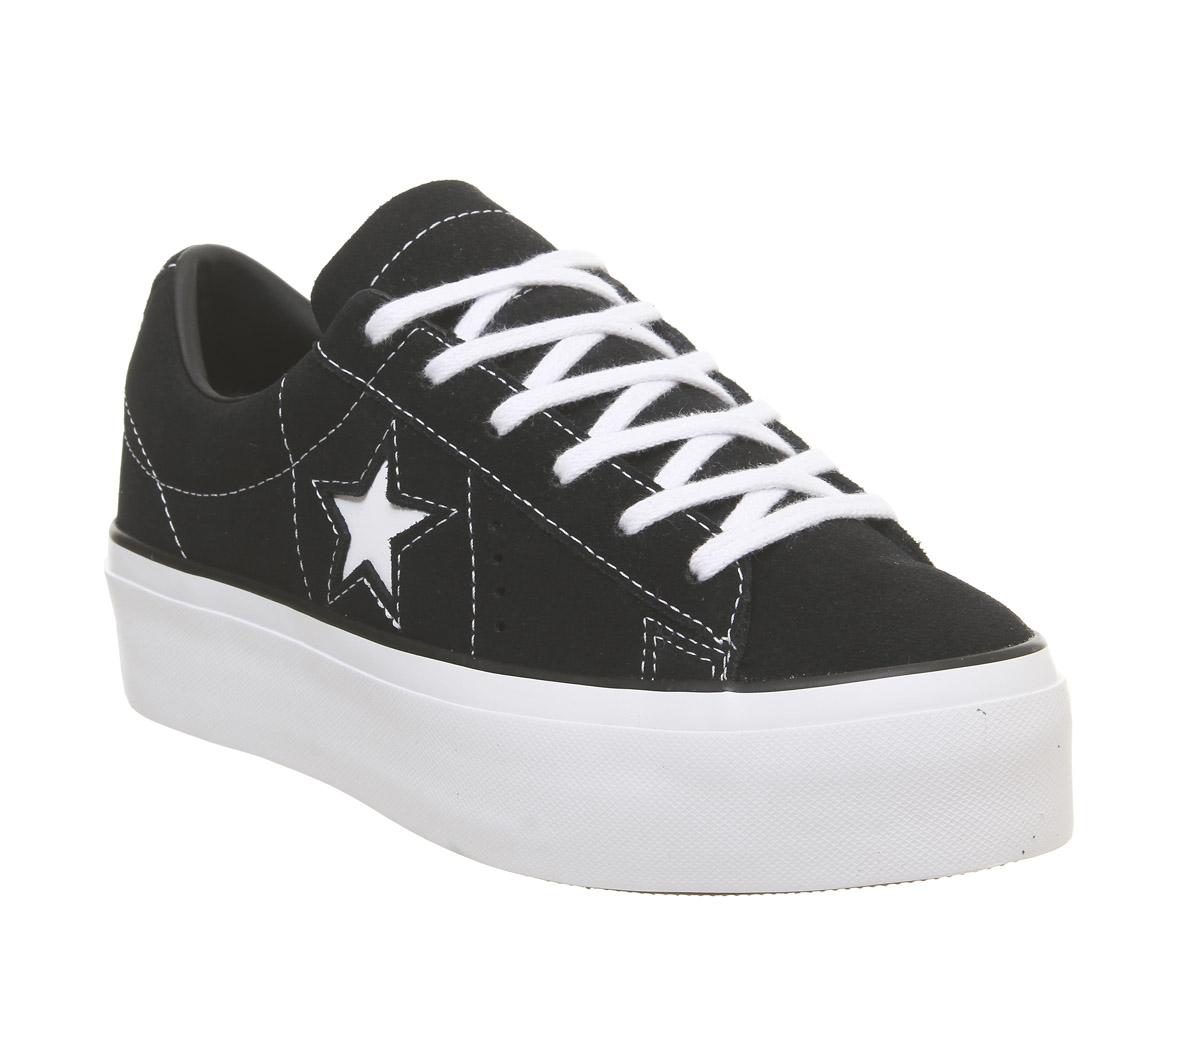 Converse One Star Platform Trainers Black Black White - Hers trainers